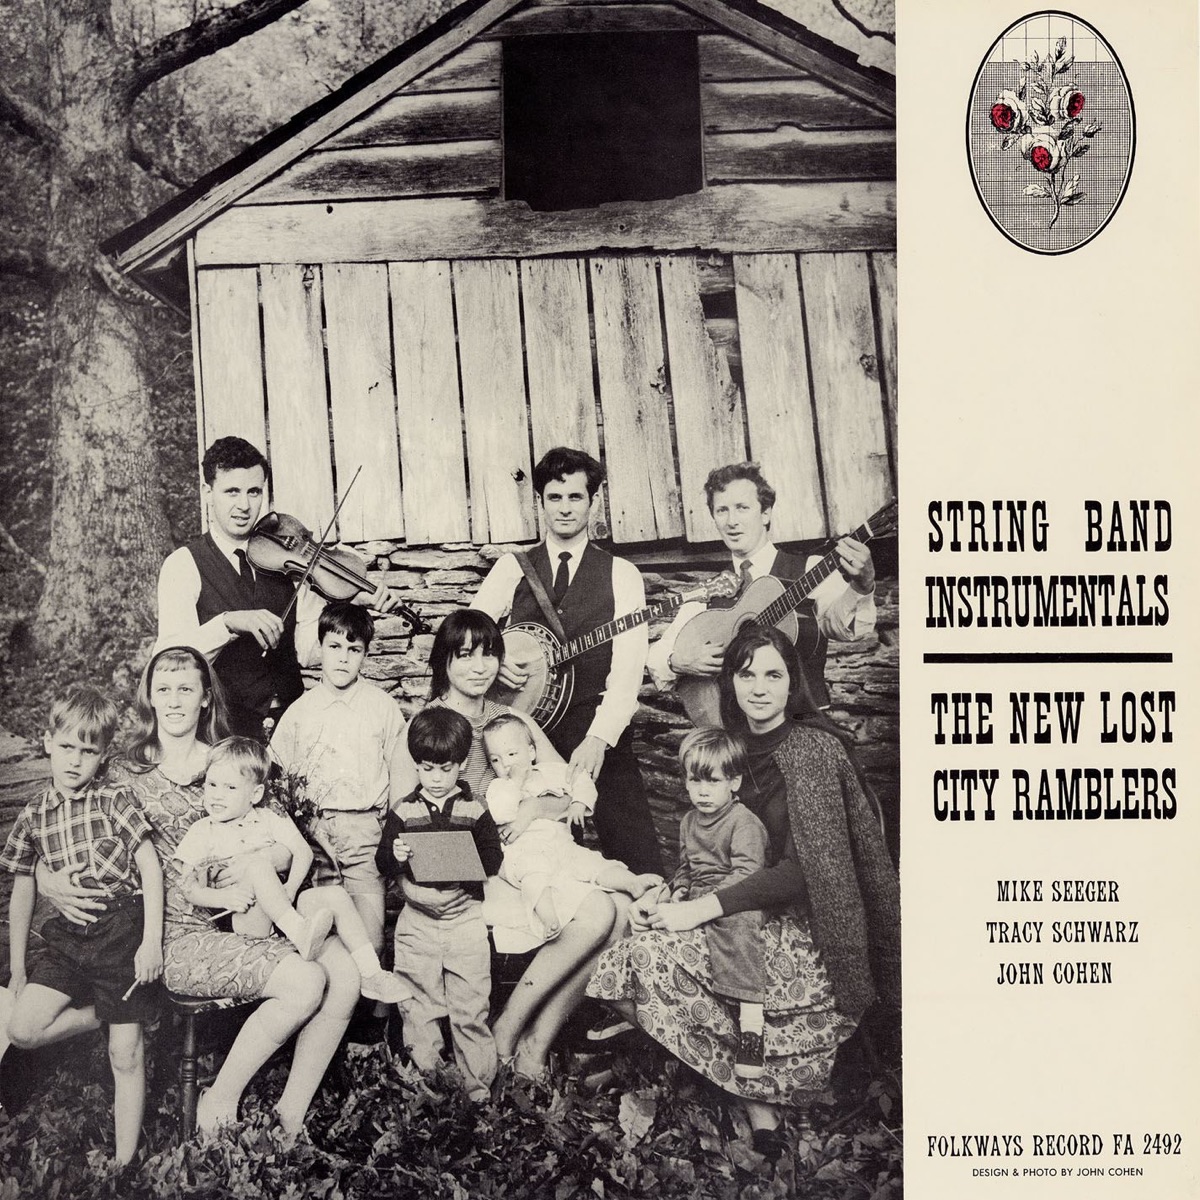 American Moonshine and Prohibition Songs - Album by The New Lost City  Ramblers - Apple Music